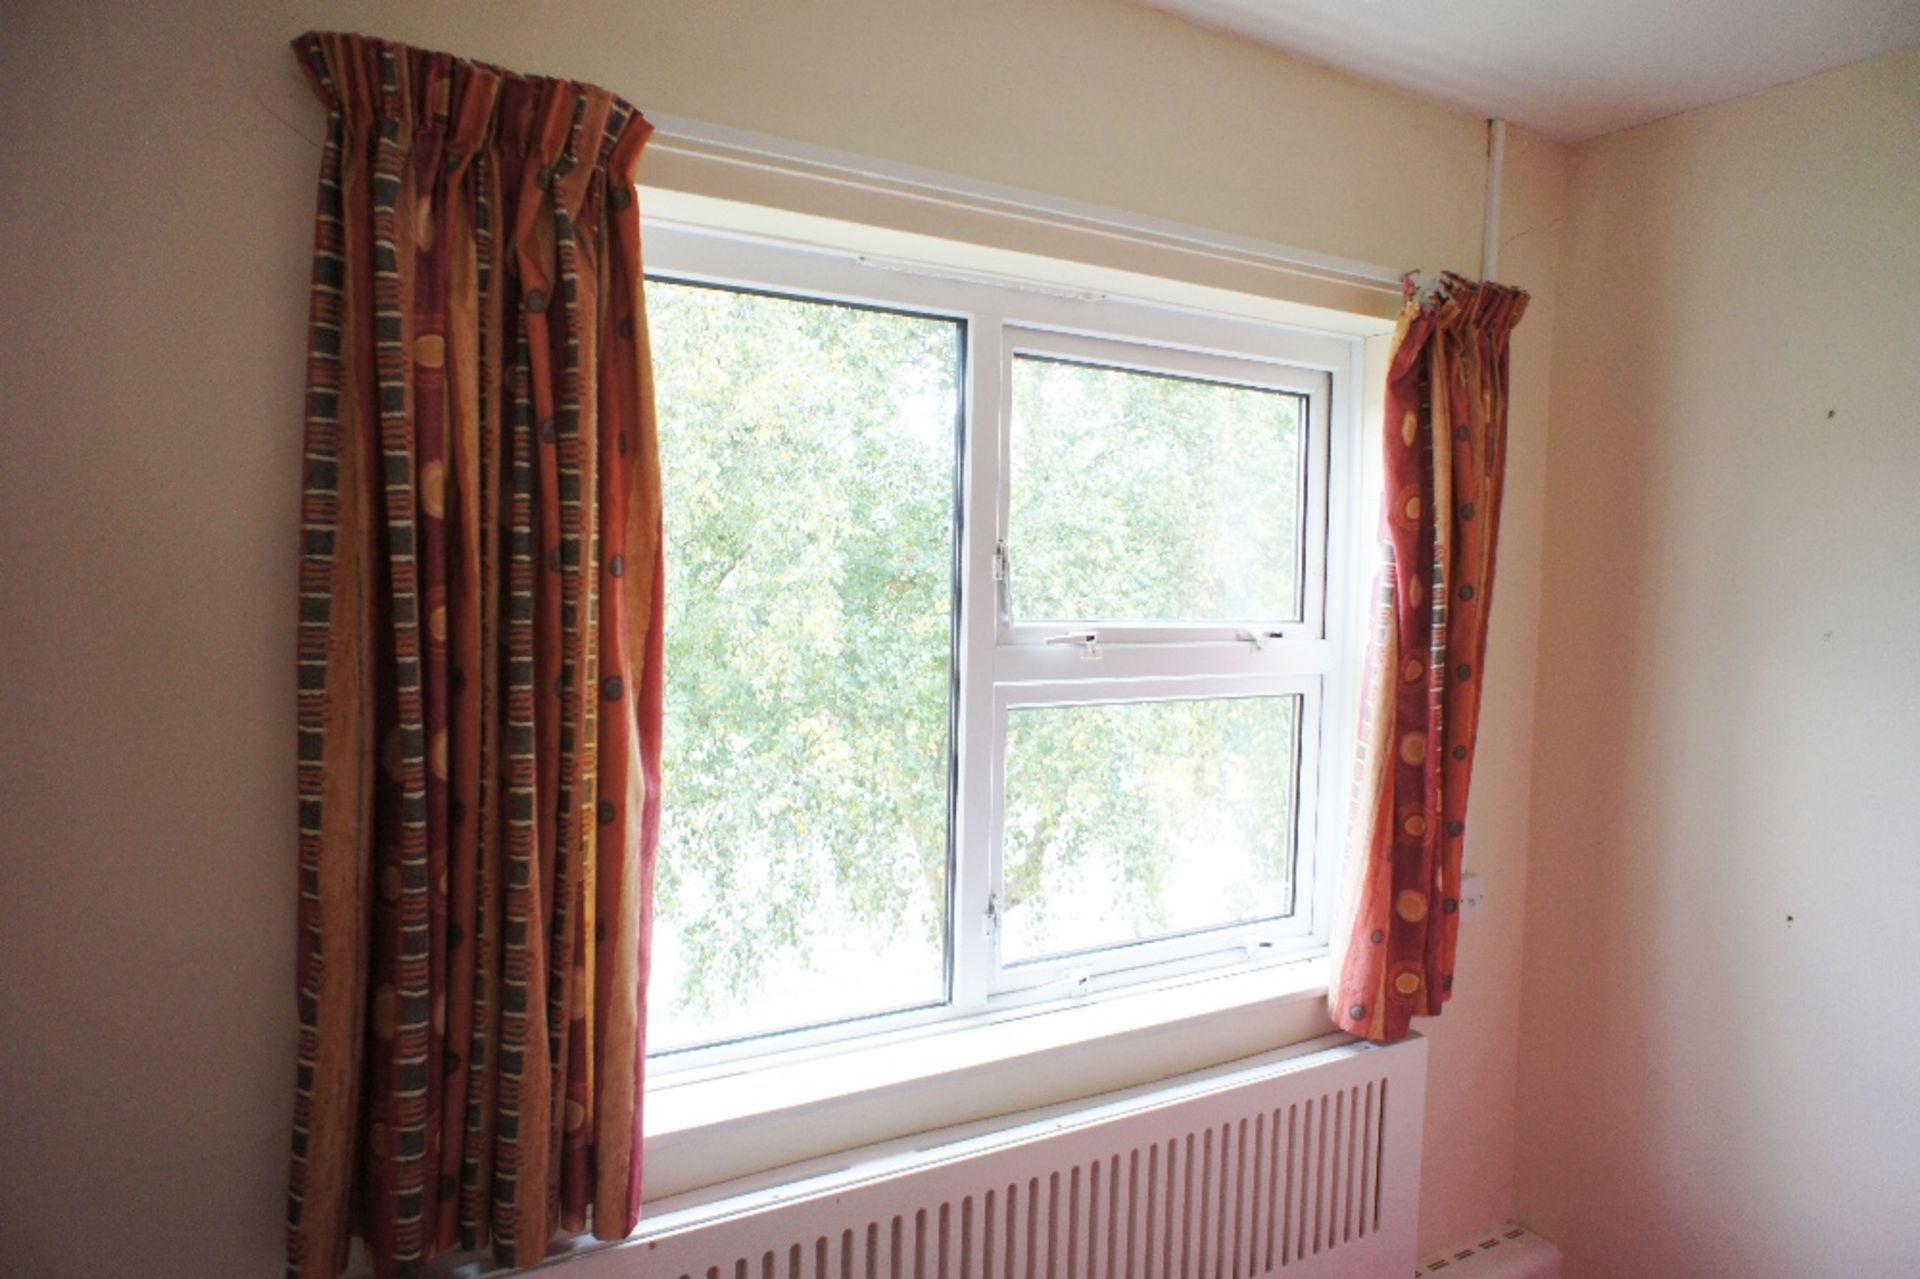 all curtains and blinds as hung throughout property of Davey Court - Image 4 of 4